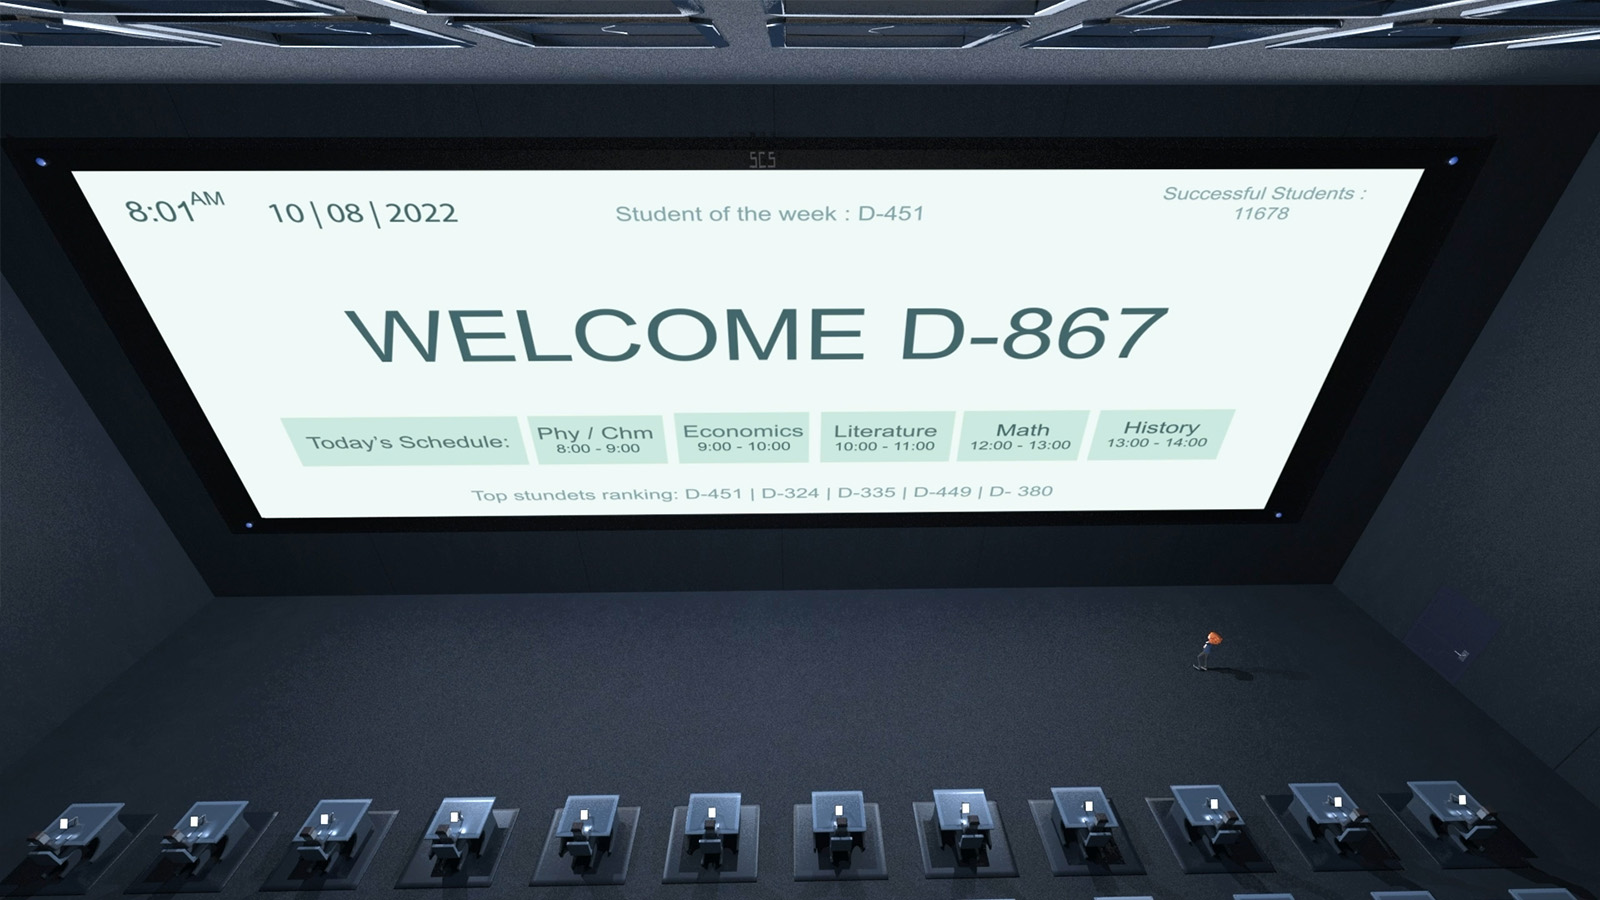 A massive screen is illuminated and has &#039;welcome d-867&#039; written on it.